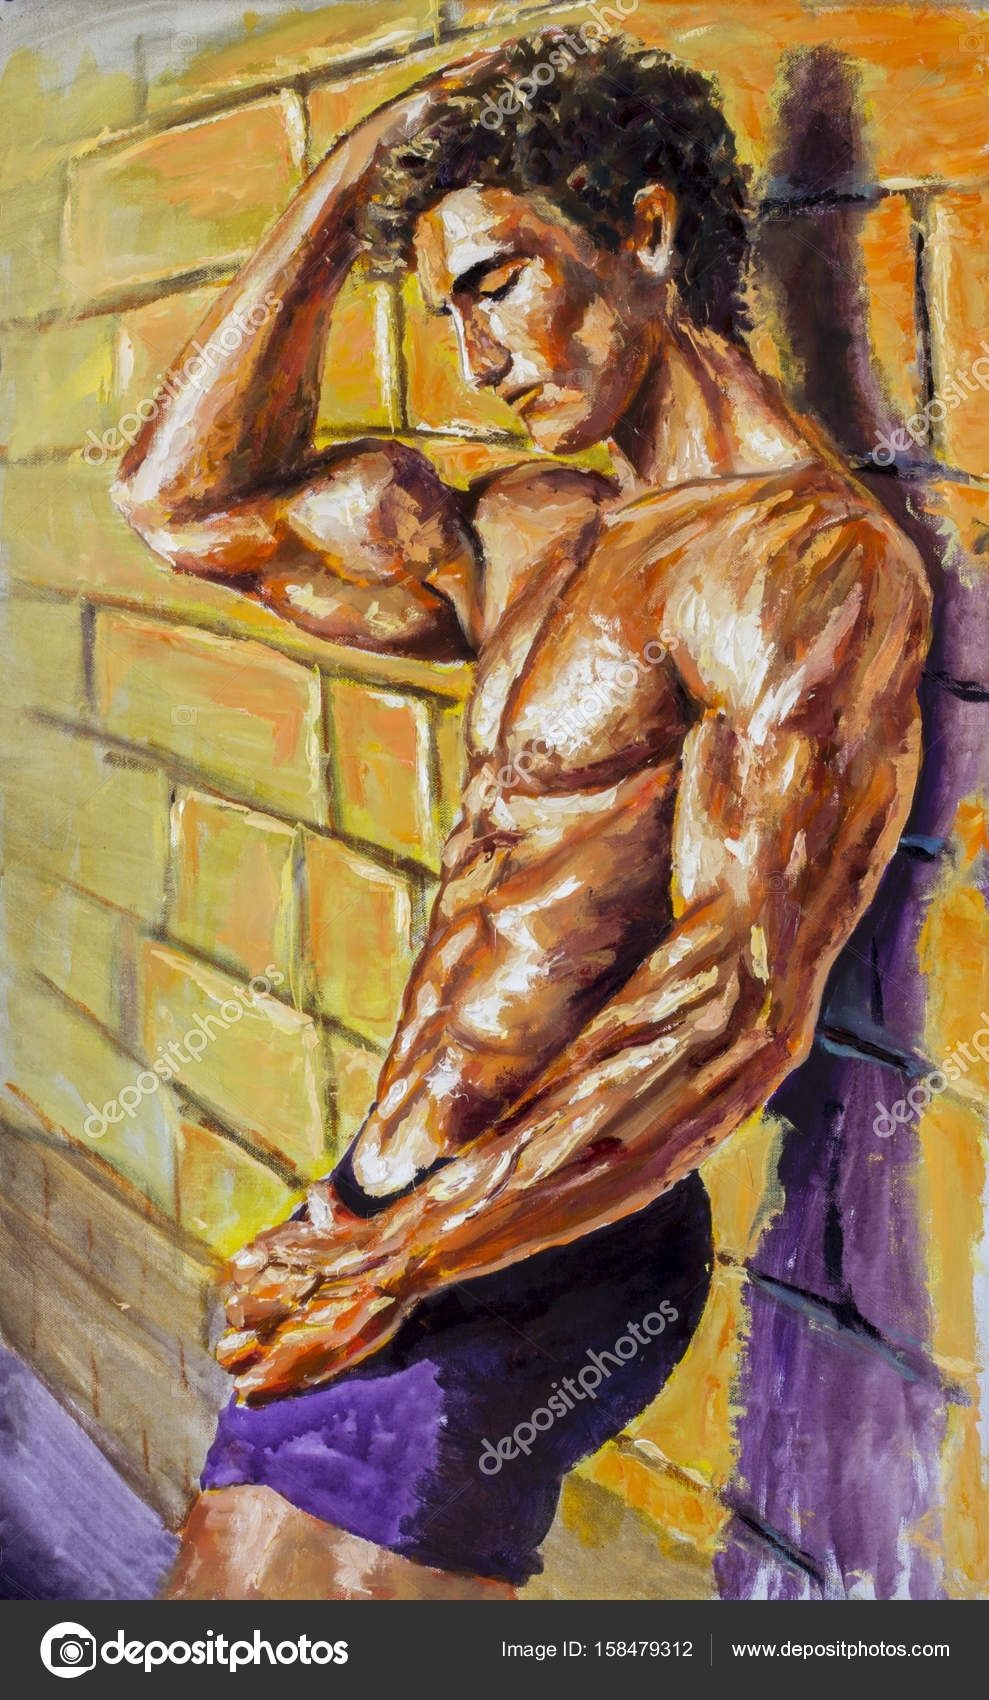 Painting, Naked, Nude, Fassion, Illustration, Man, Male, Abs, Sexy Regarding Most Recent Abstract Body Wall Art (View 14 of 20)